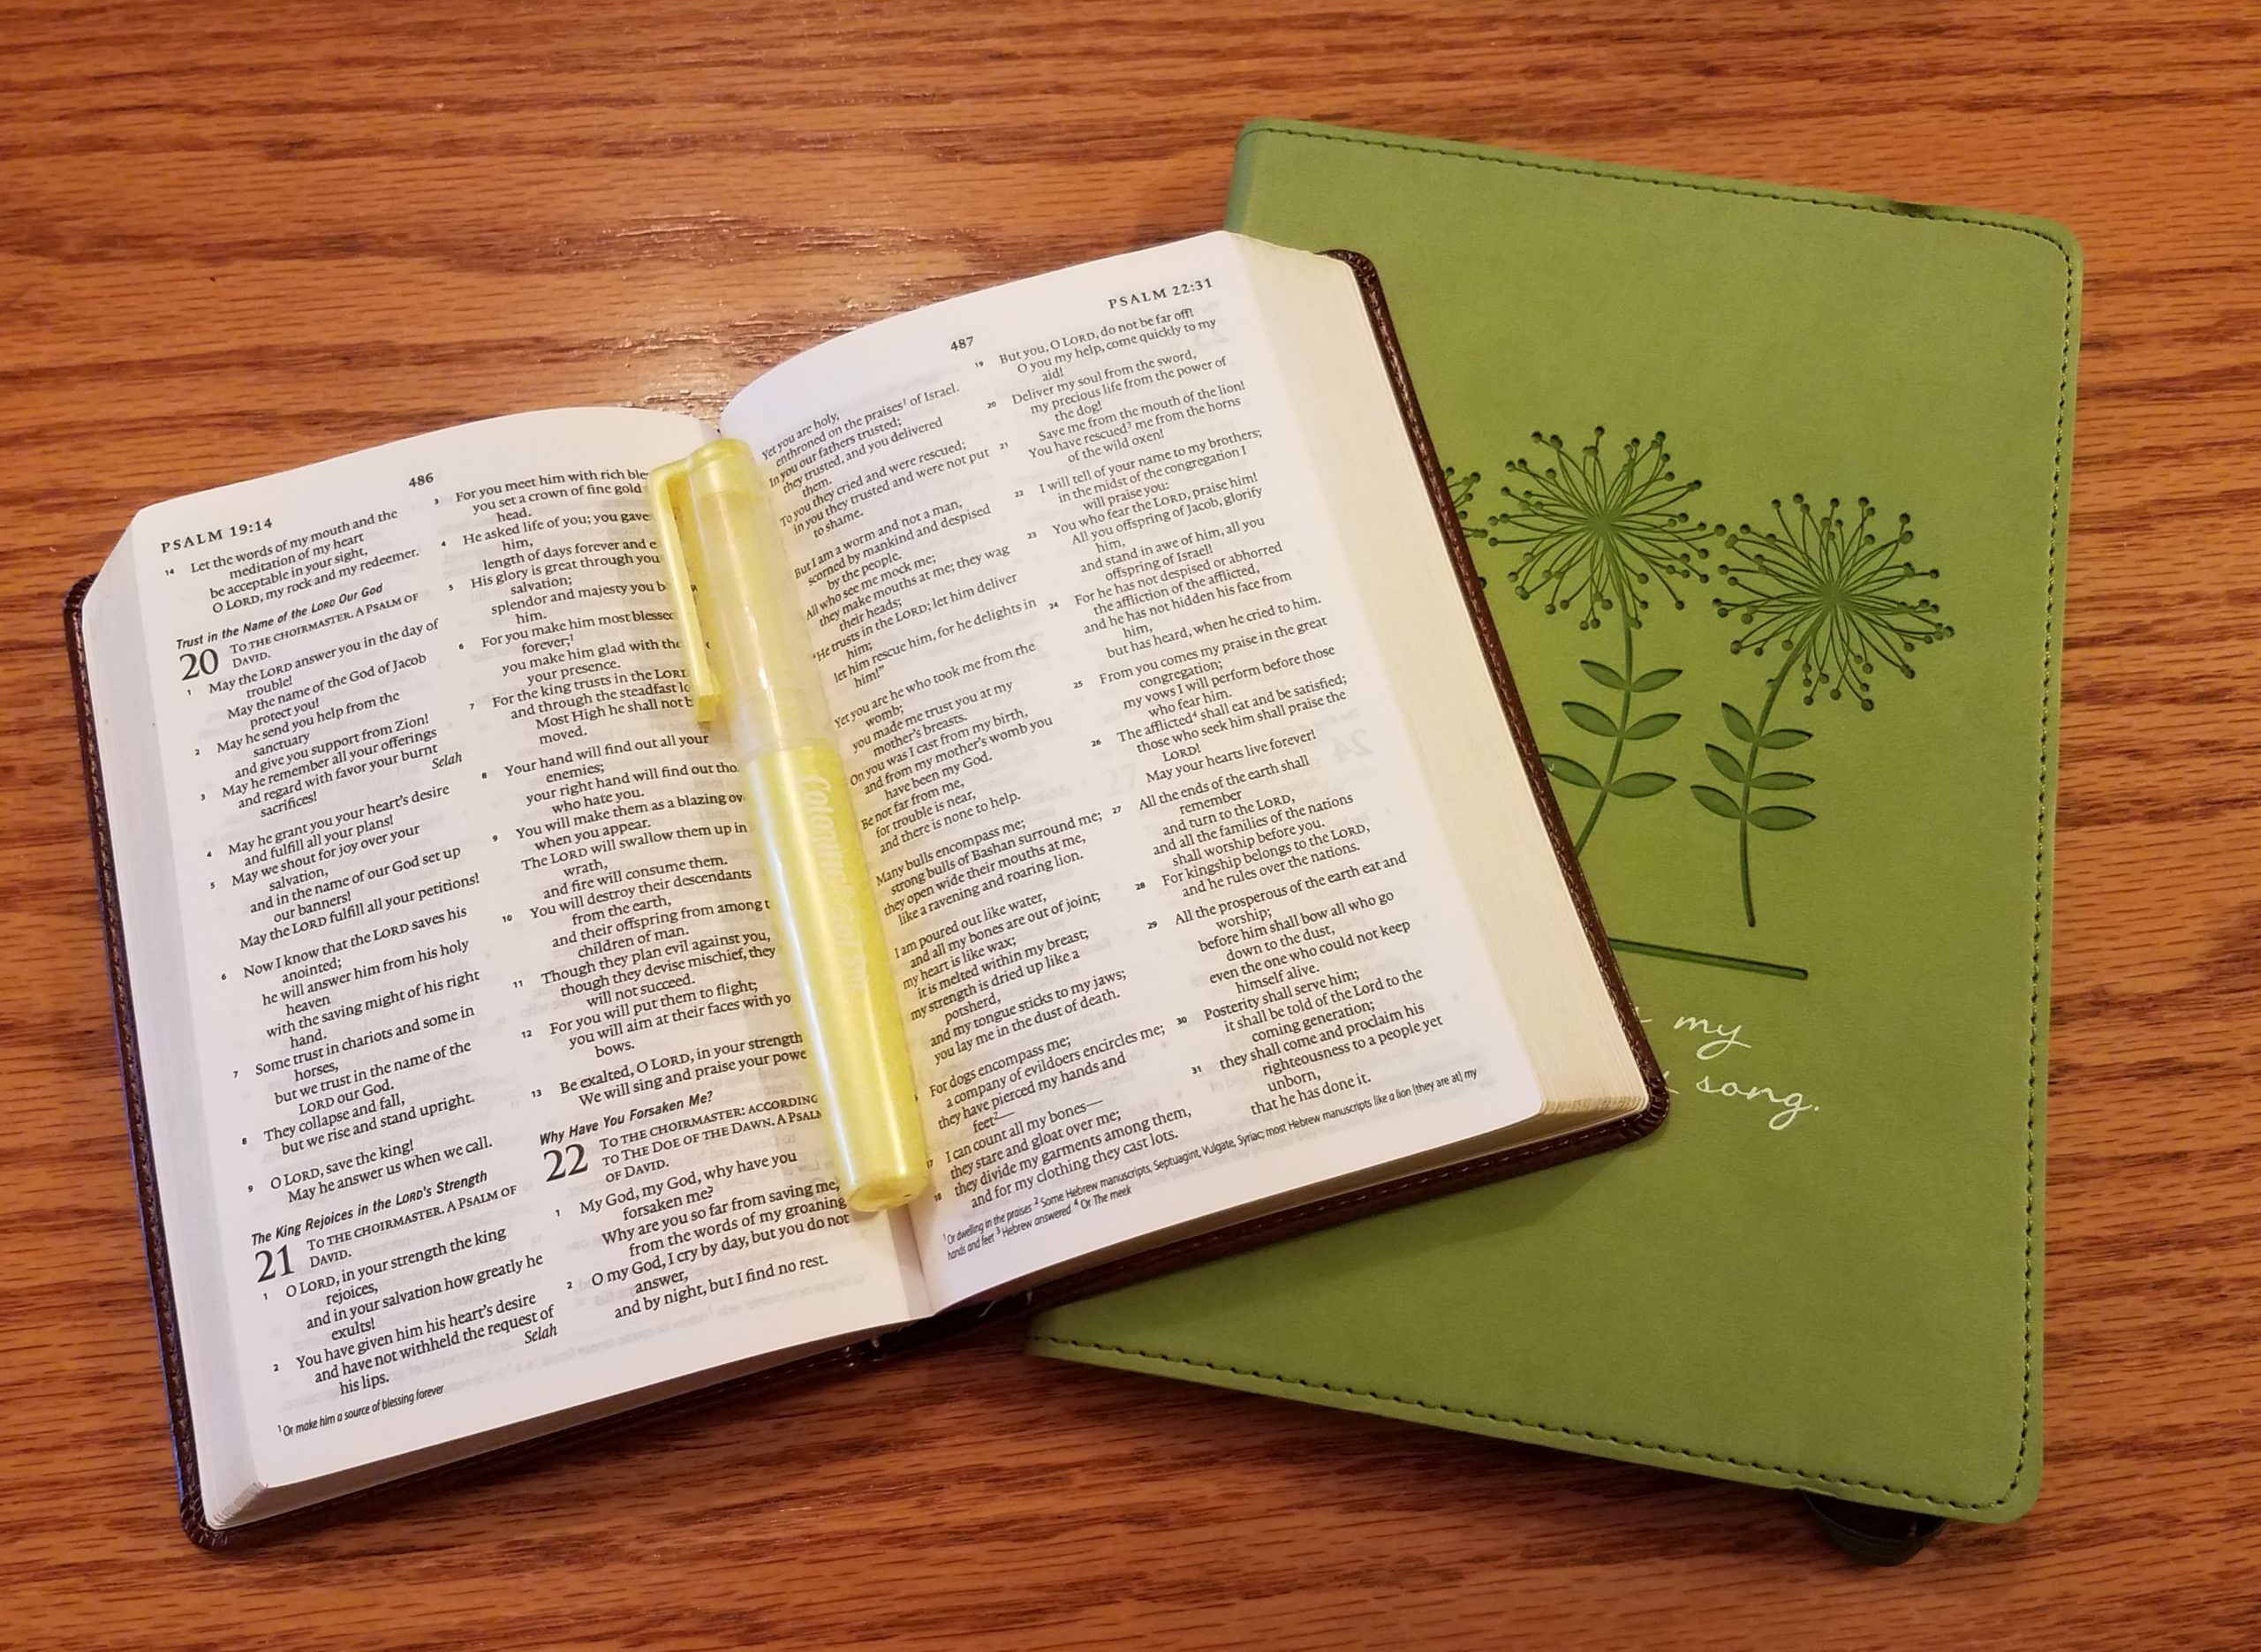 Soul Care and Scripture